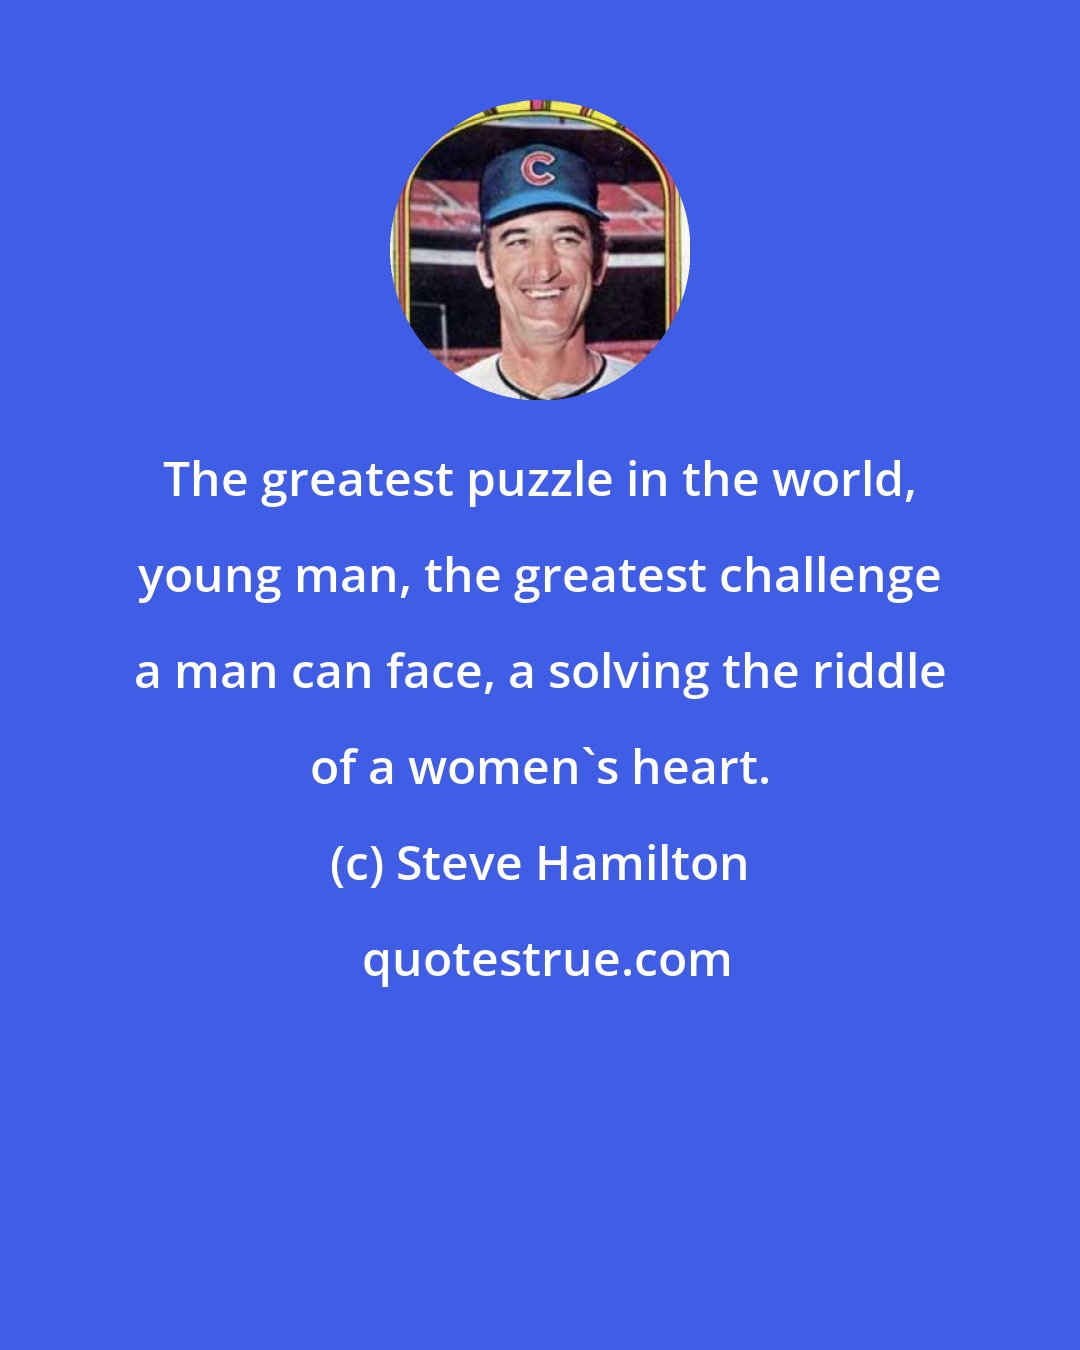 Steve Hamilton: The greatest puzzle in the world, young man, the greatest challenge a man can face, a solving the riddle of a women's heart.